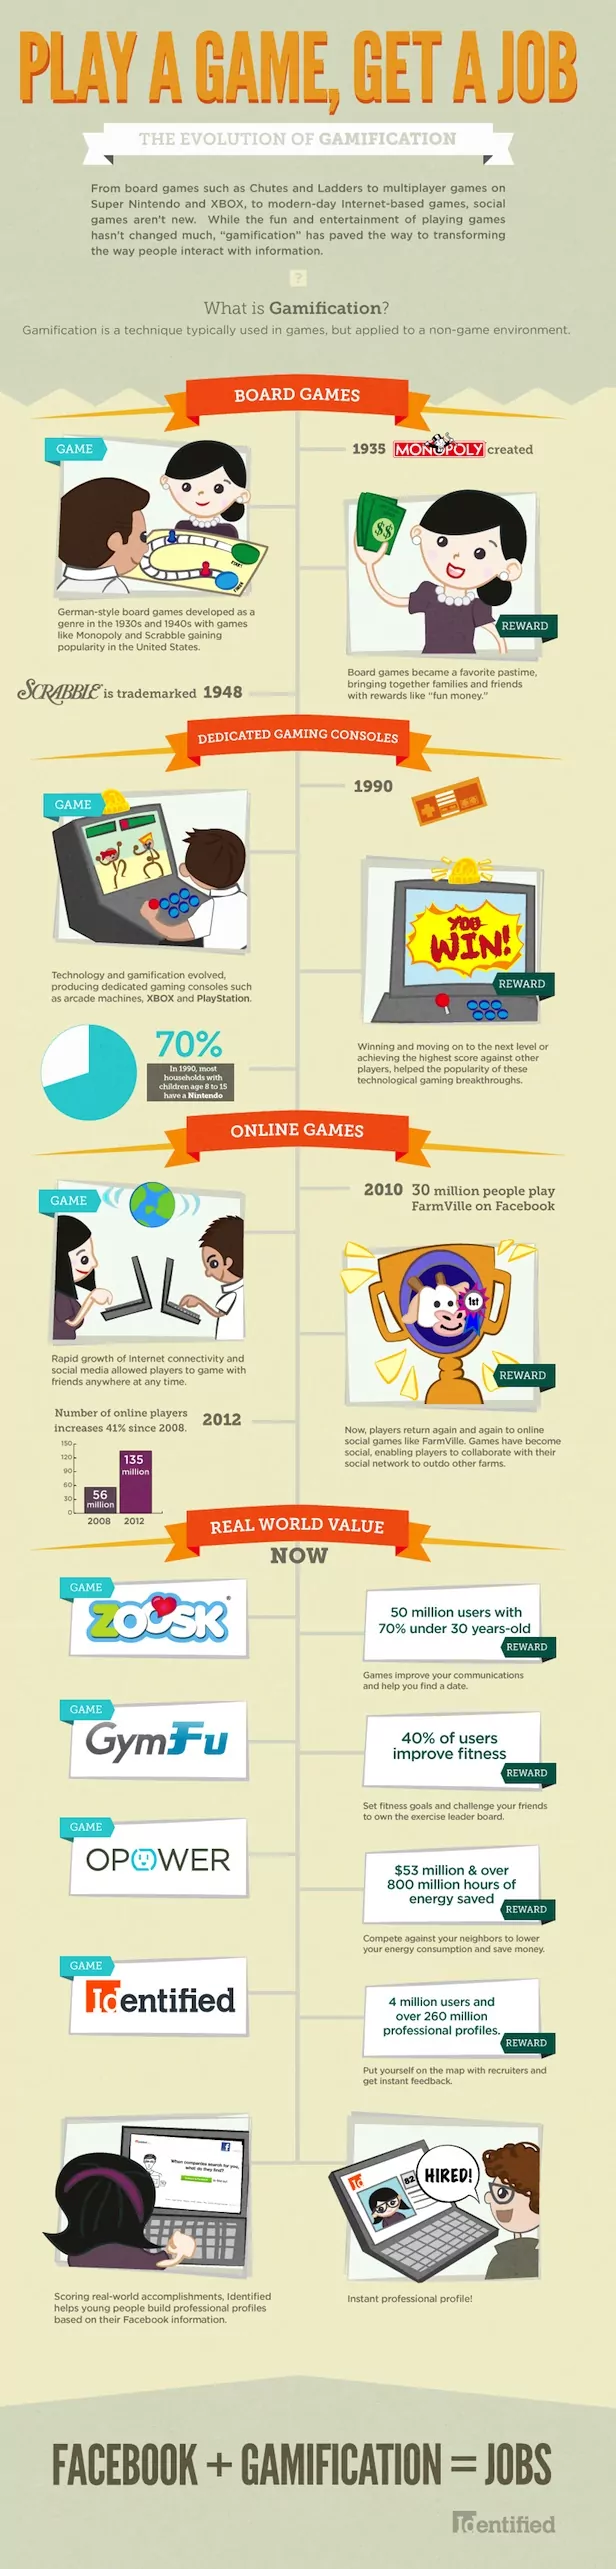 evolution of gamification